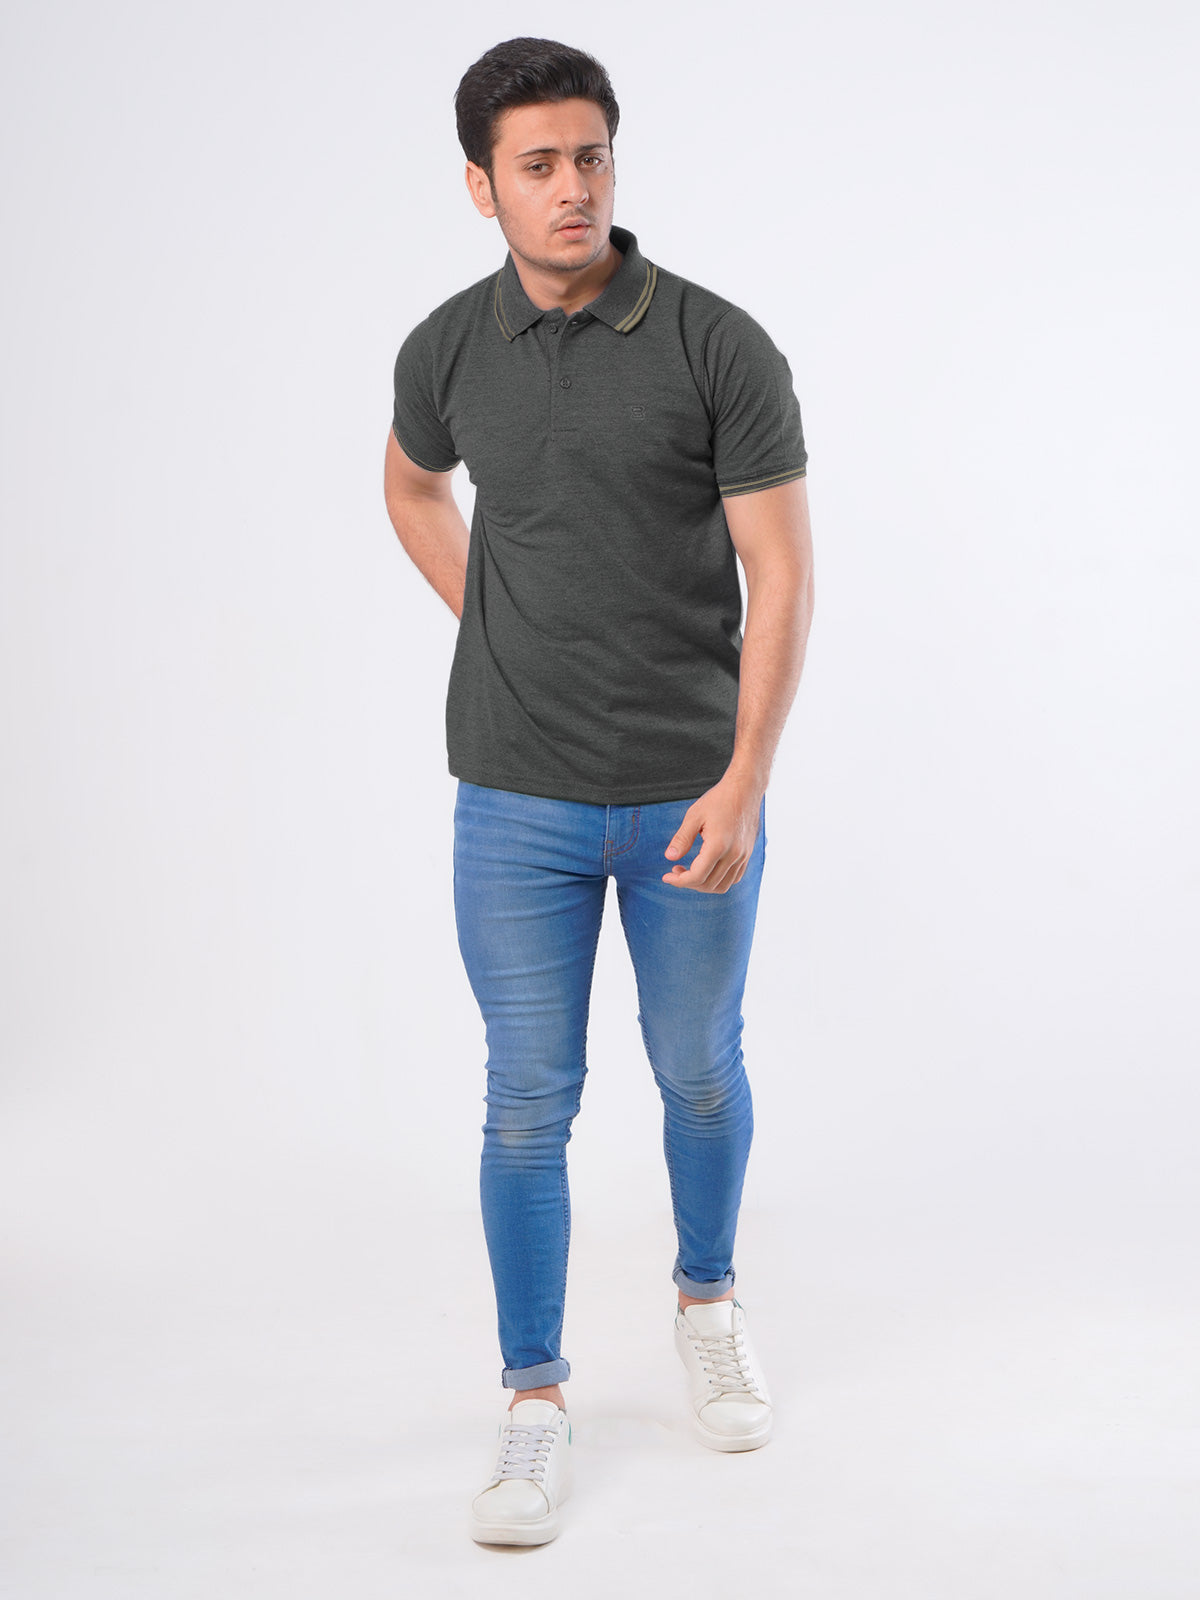 Charcoal Grey Plain Contrast Tipping Half Sleeves Polo T-Shirt (POLO-529)